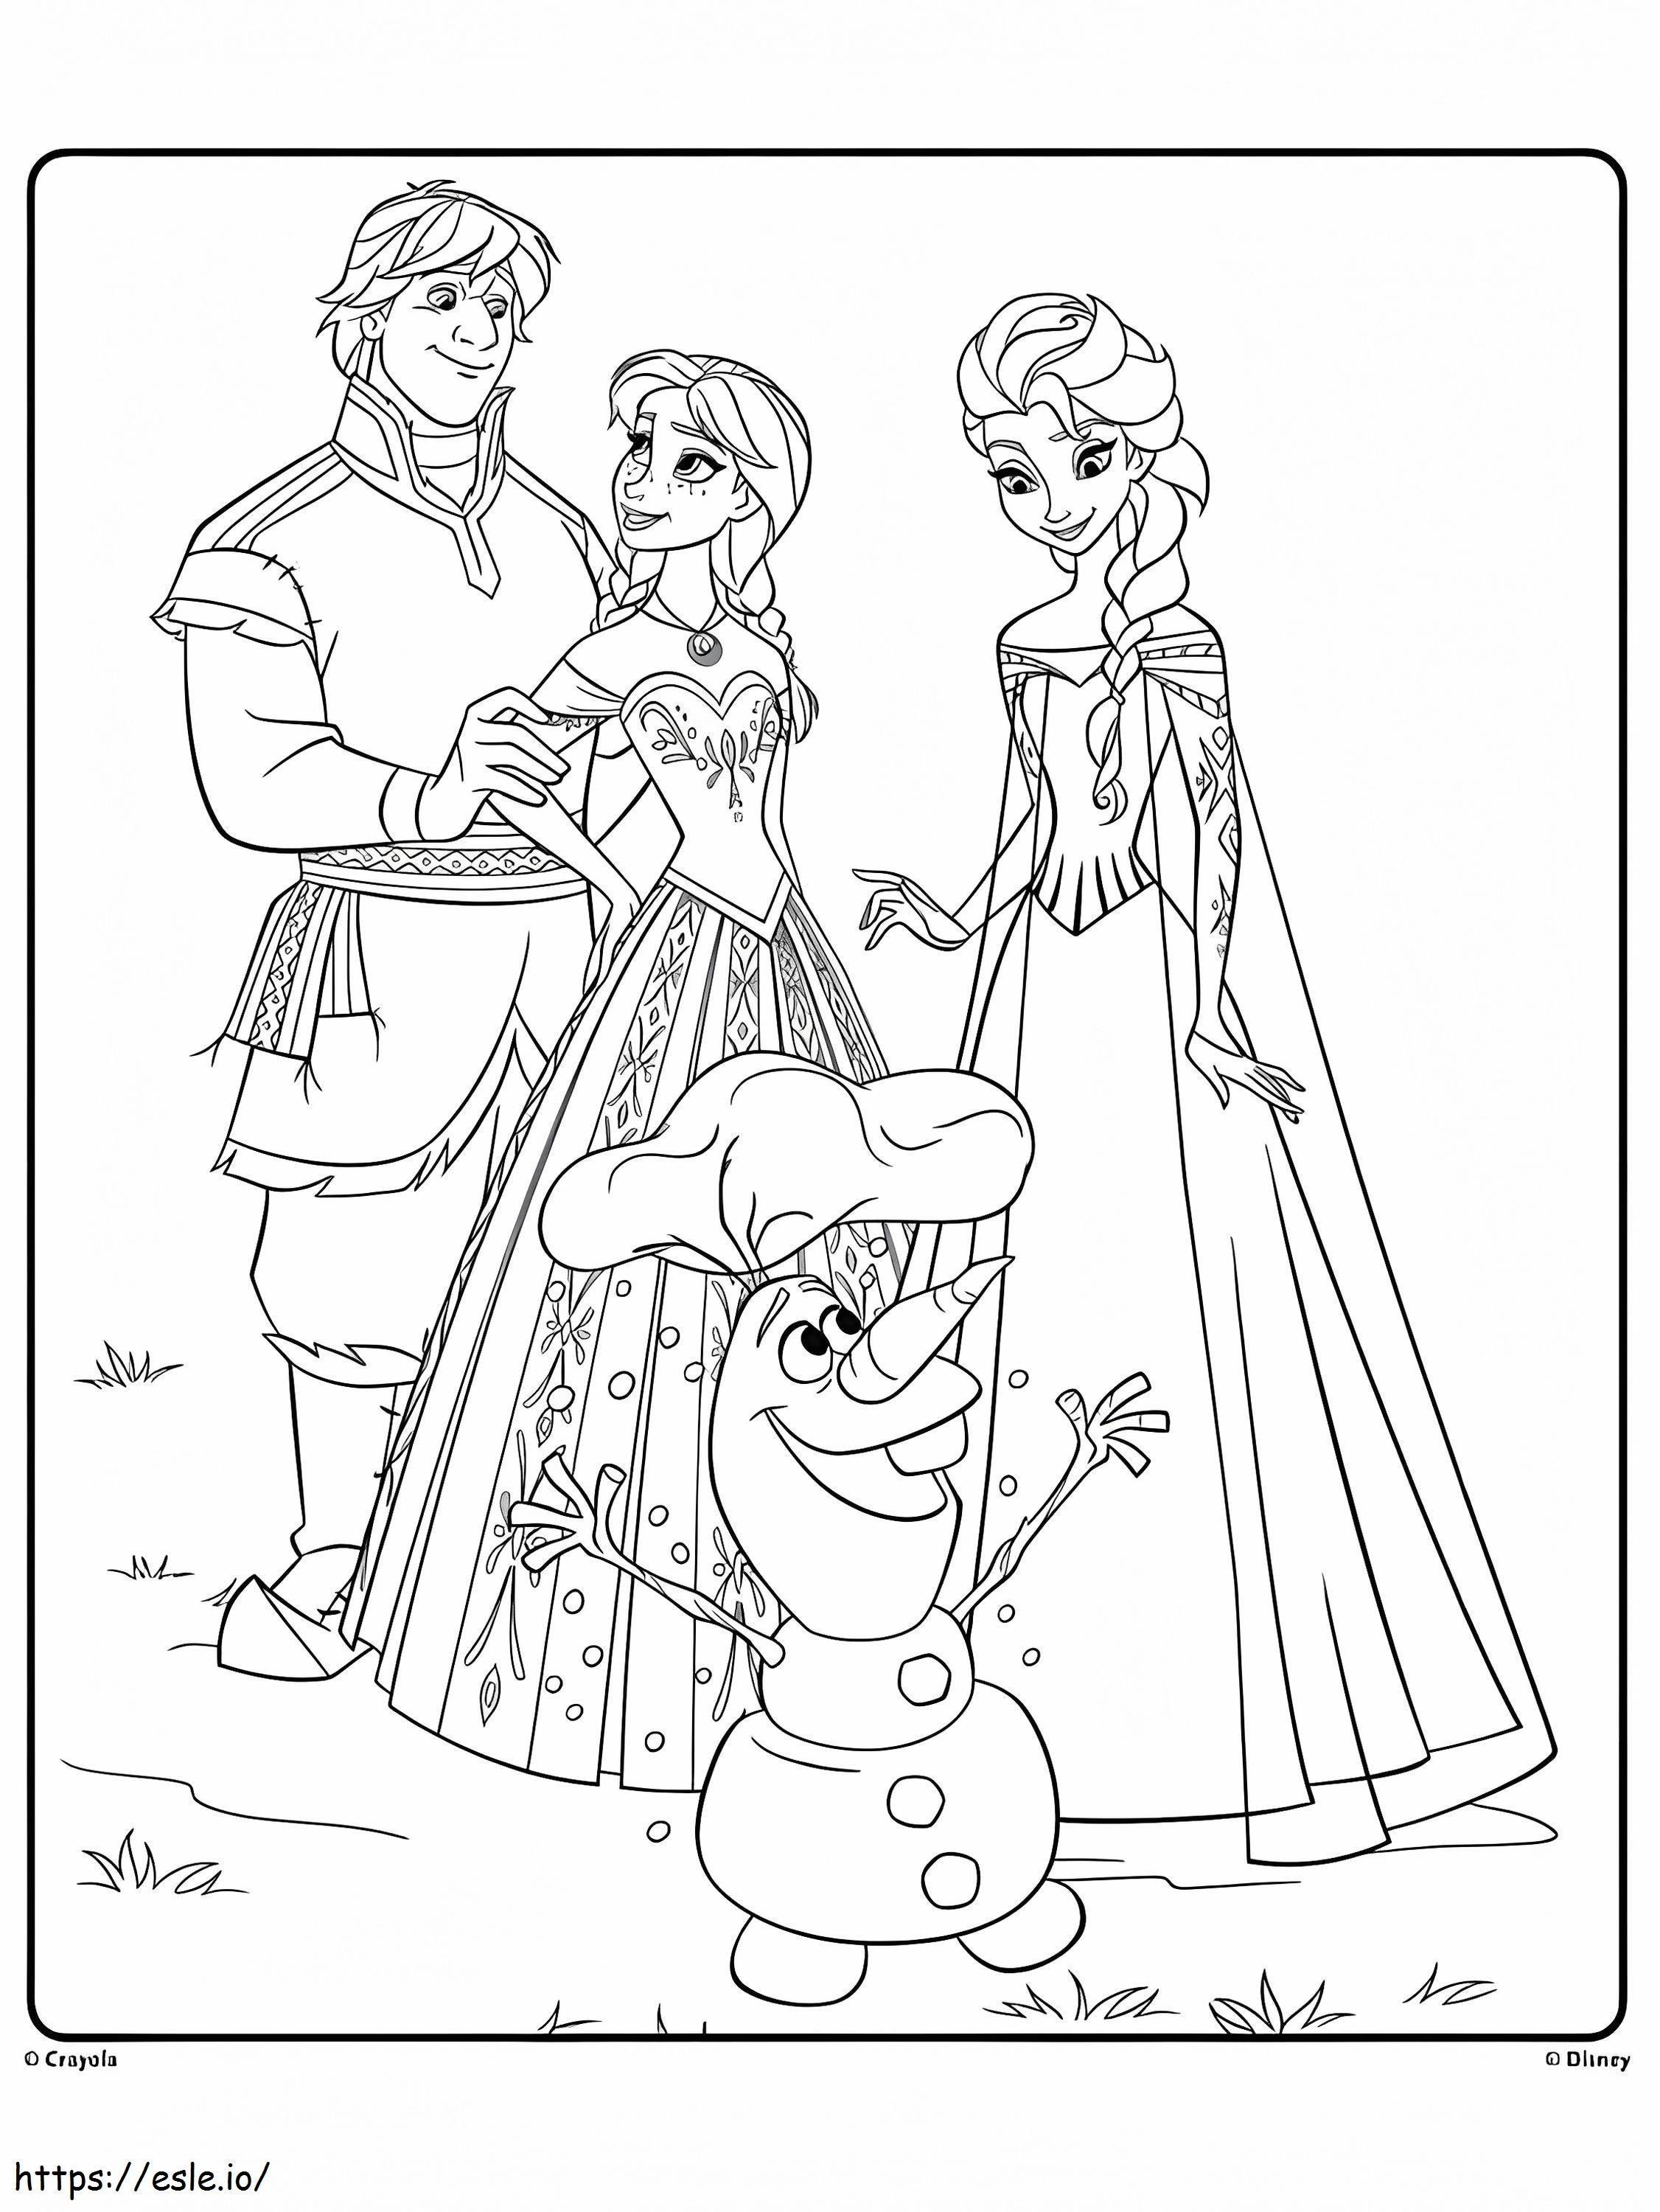 Olaf And Friends coloring page